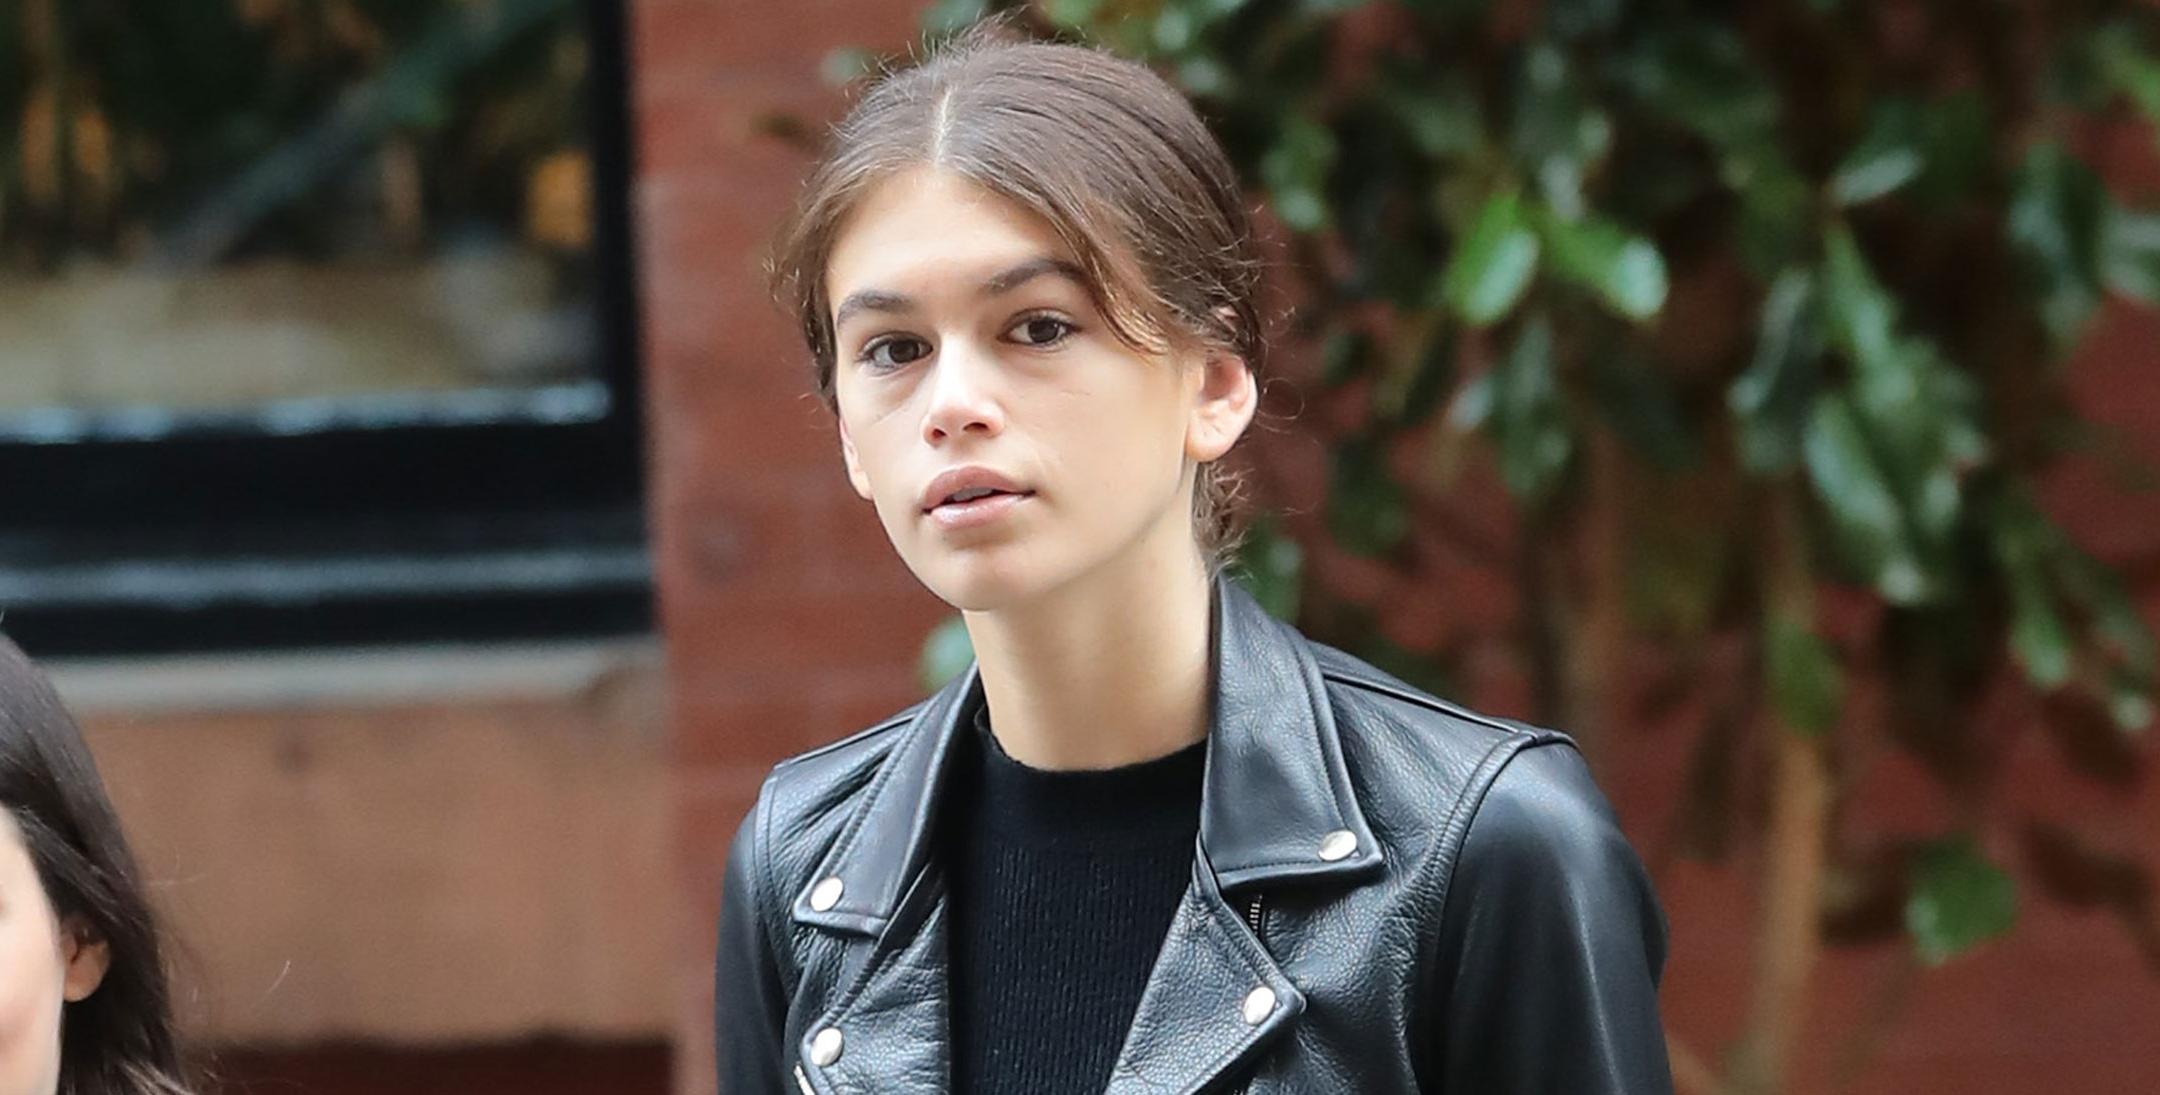 Kaia Gerber Spotted At New York Fashion Week Looking Exhausted